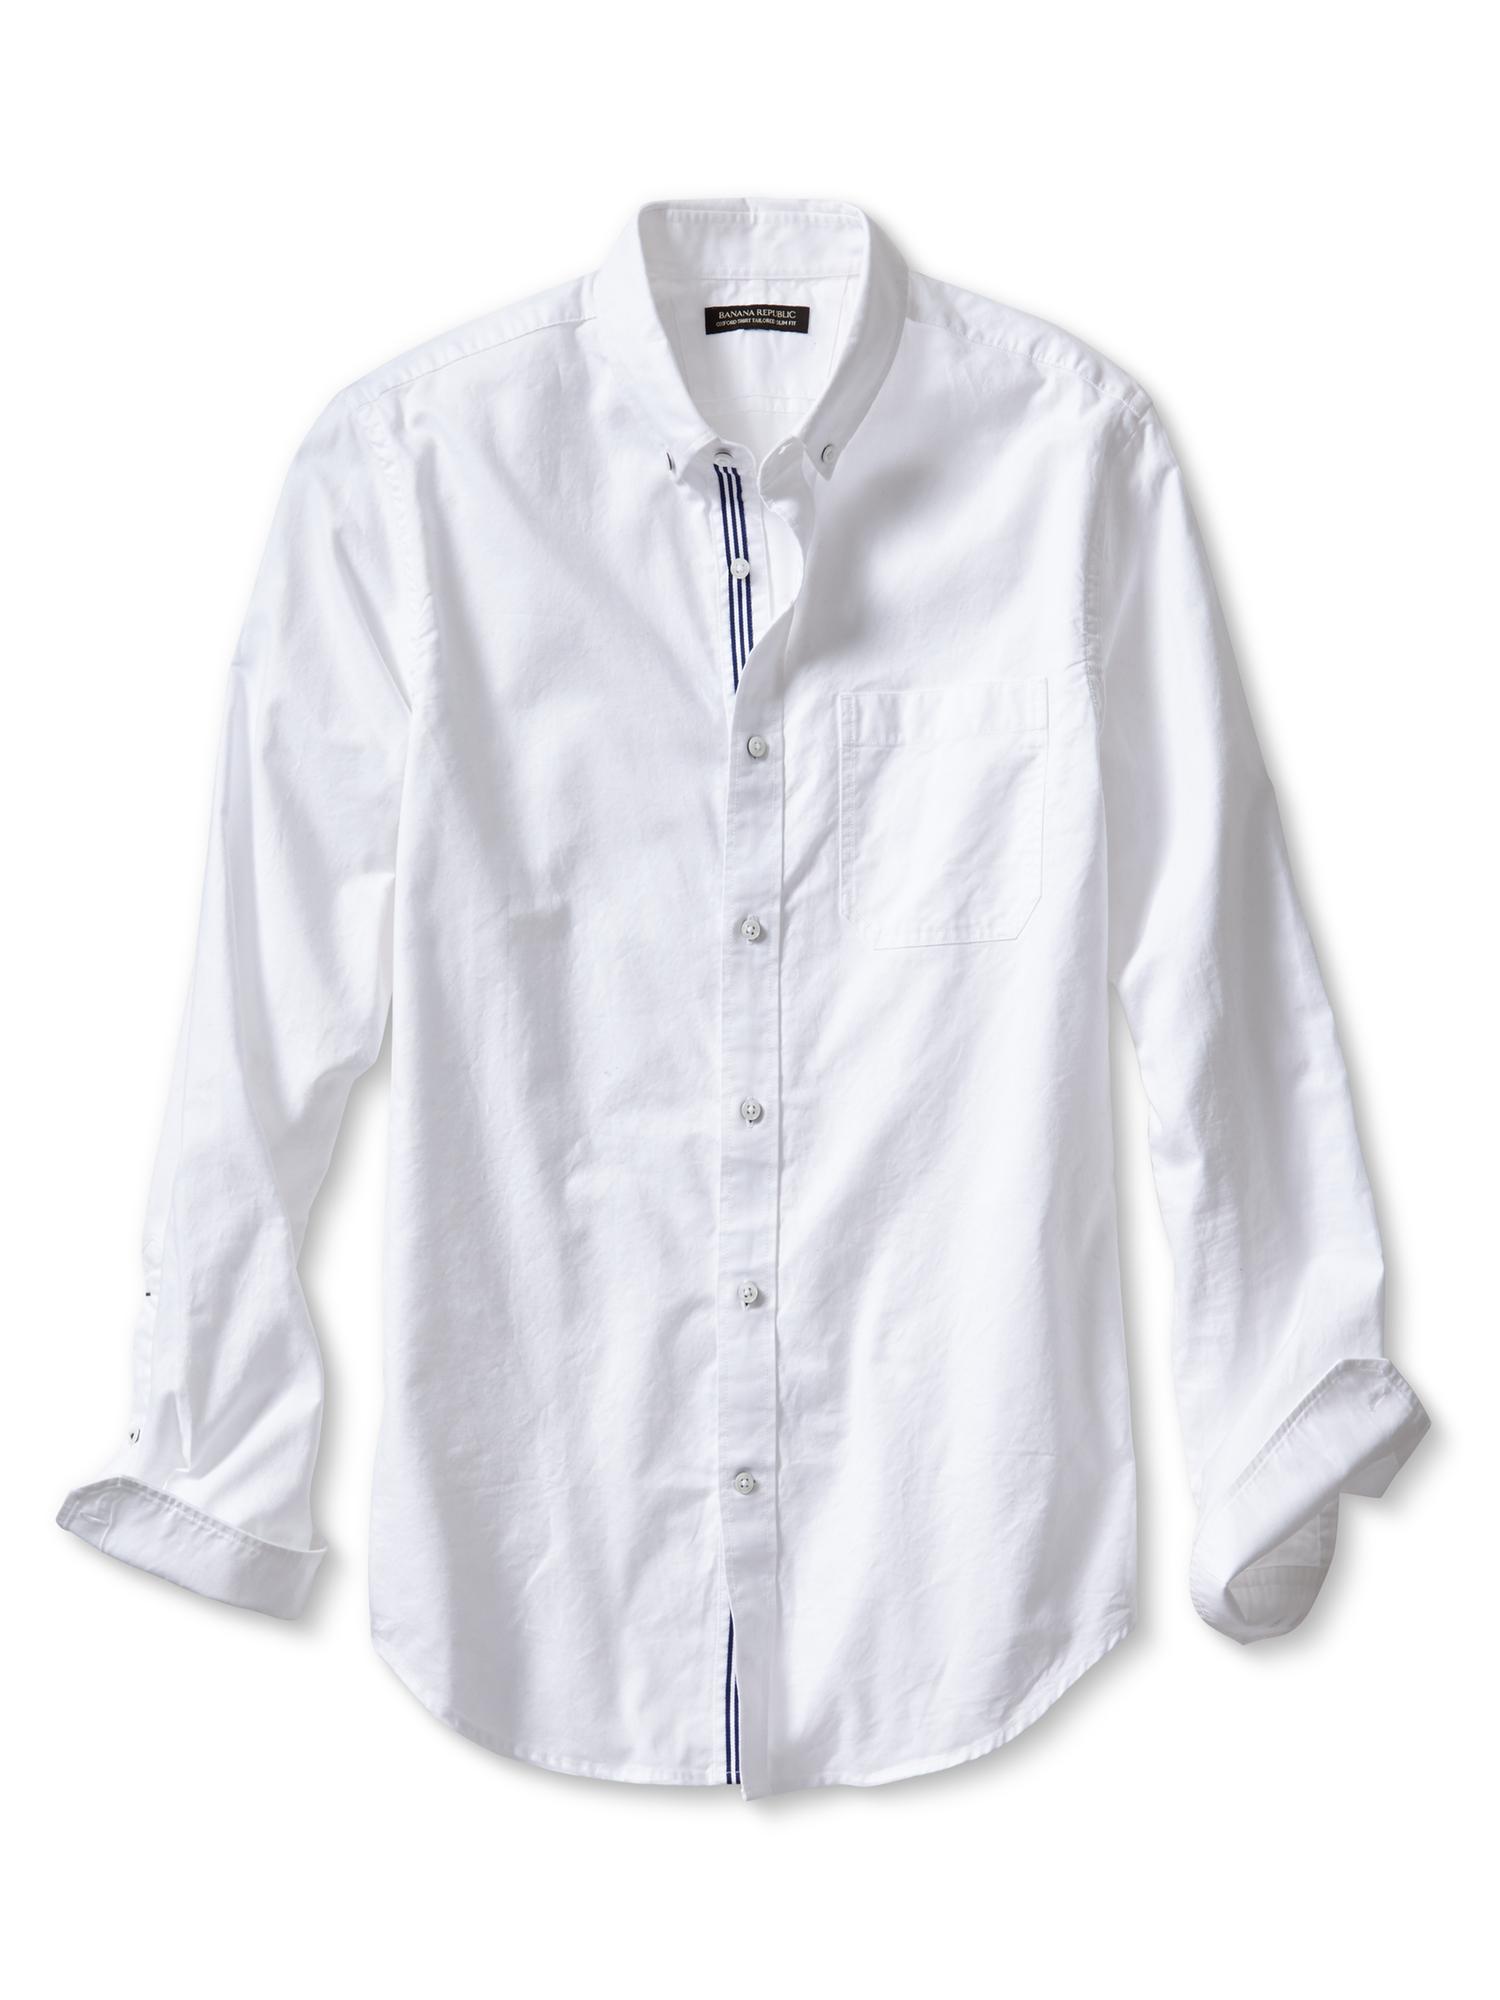 Tailored Slim-Fit Bold Oxford Shirt